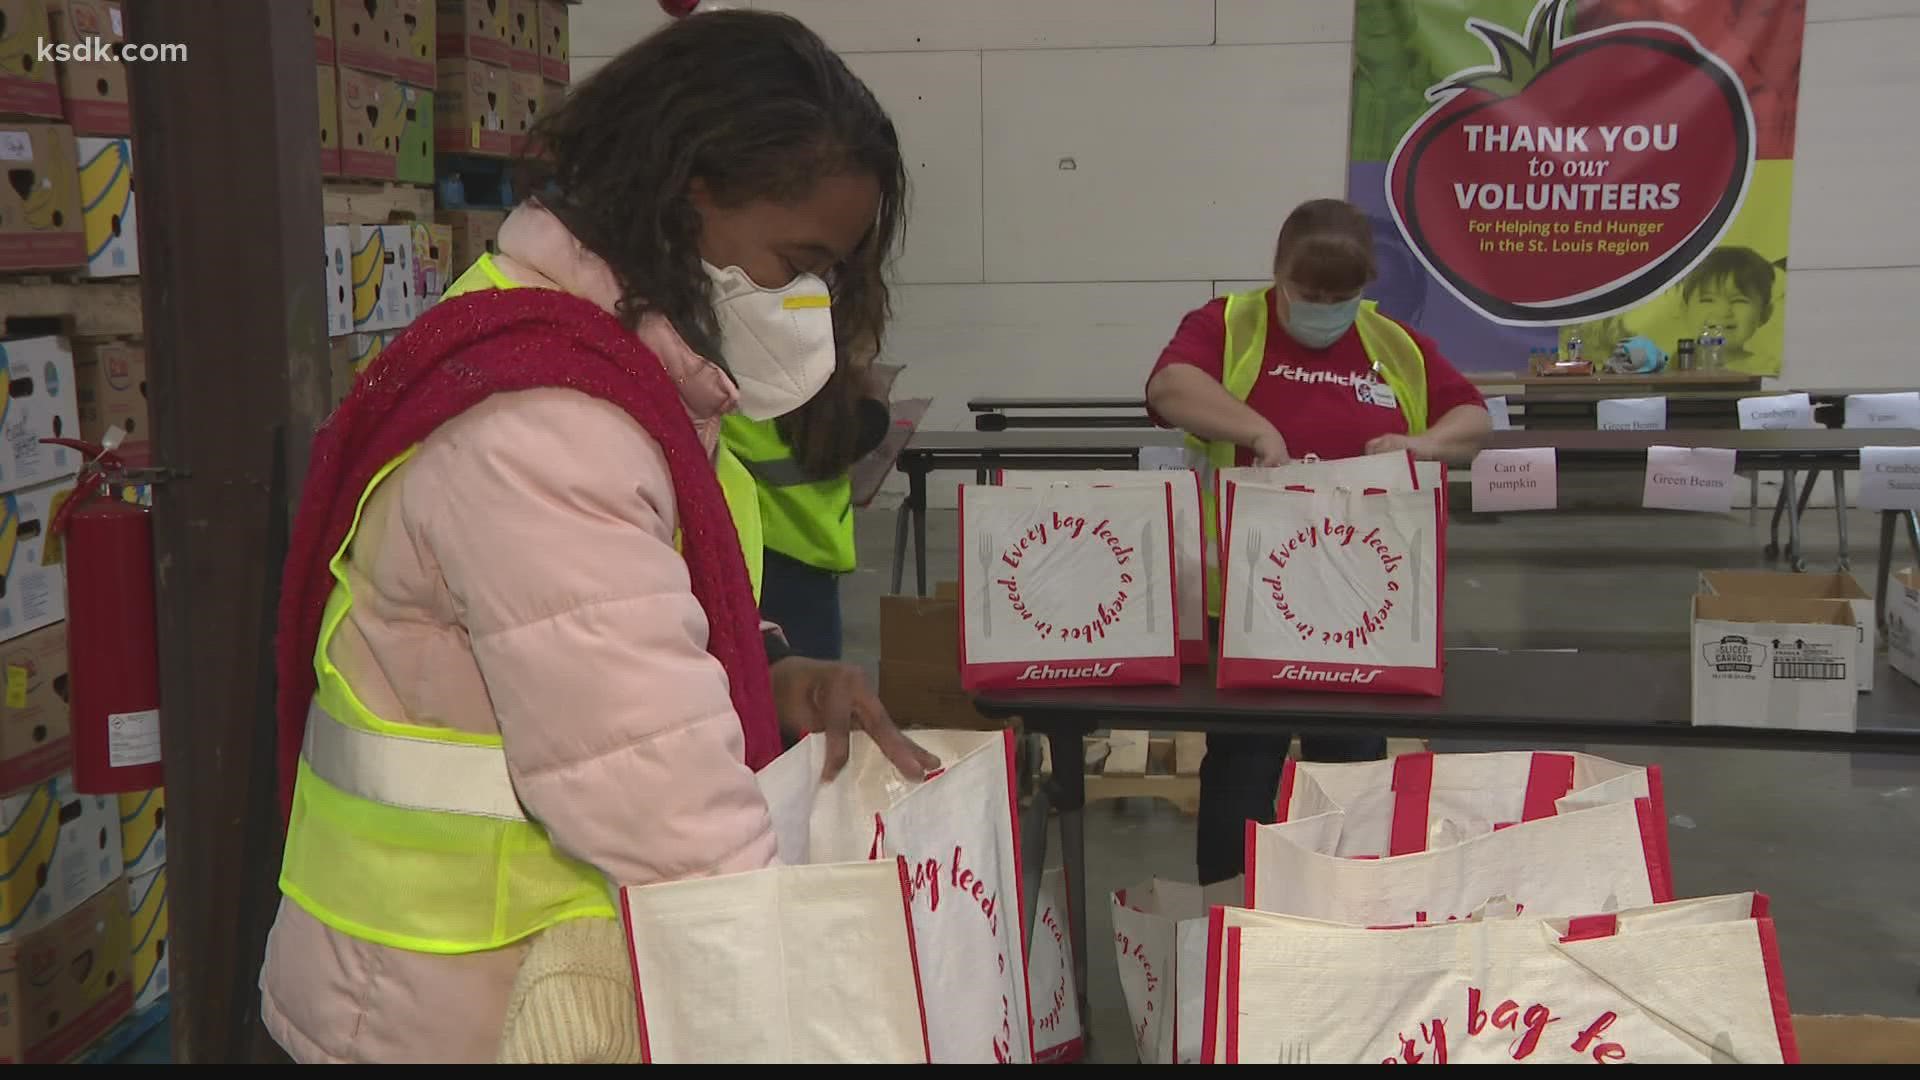 Operation Food Search and Schnucks teamed up to distribute Thanksgiving meals for families in need.